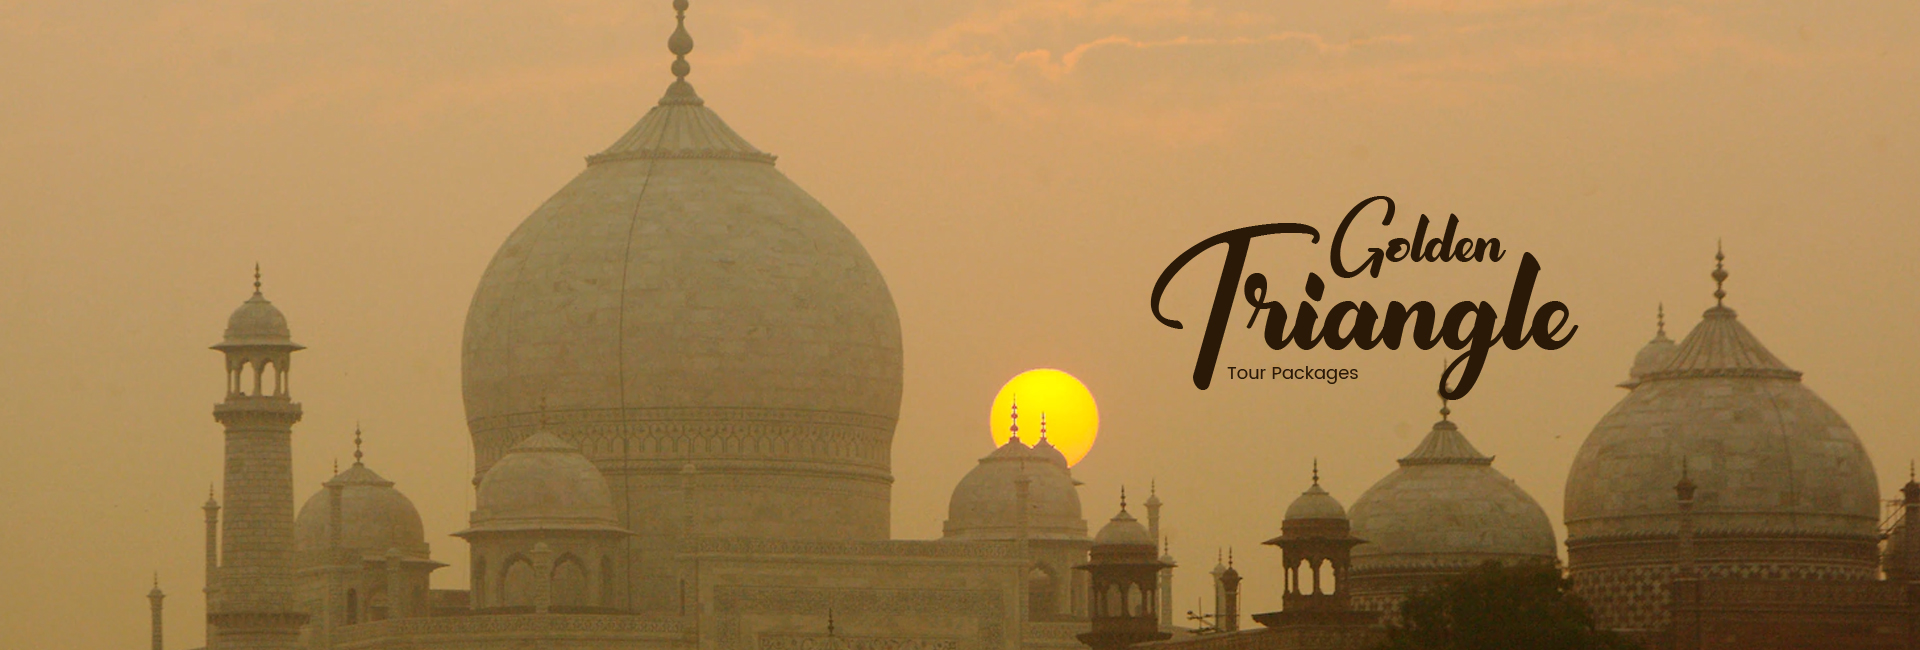 GOLDEN TRIANGLE TOURS